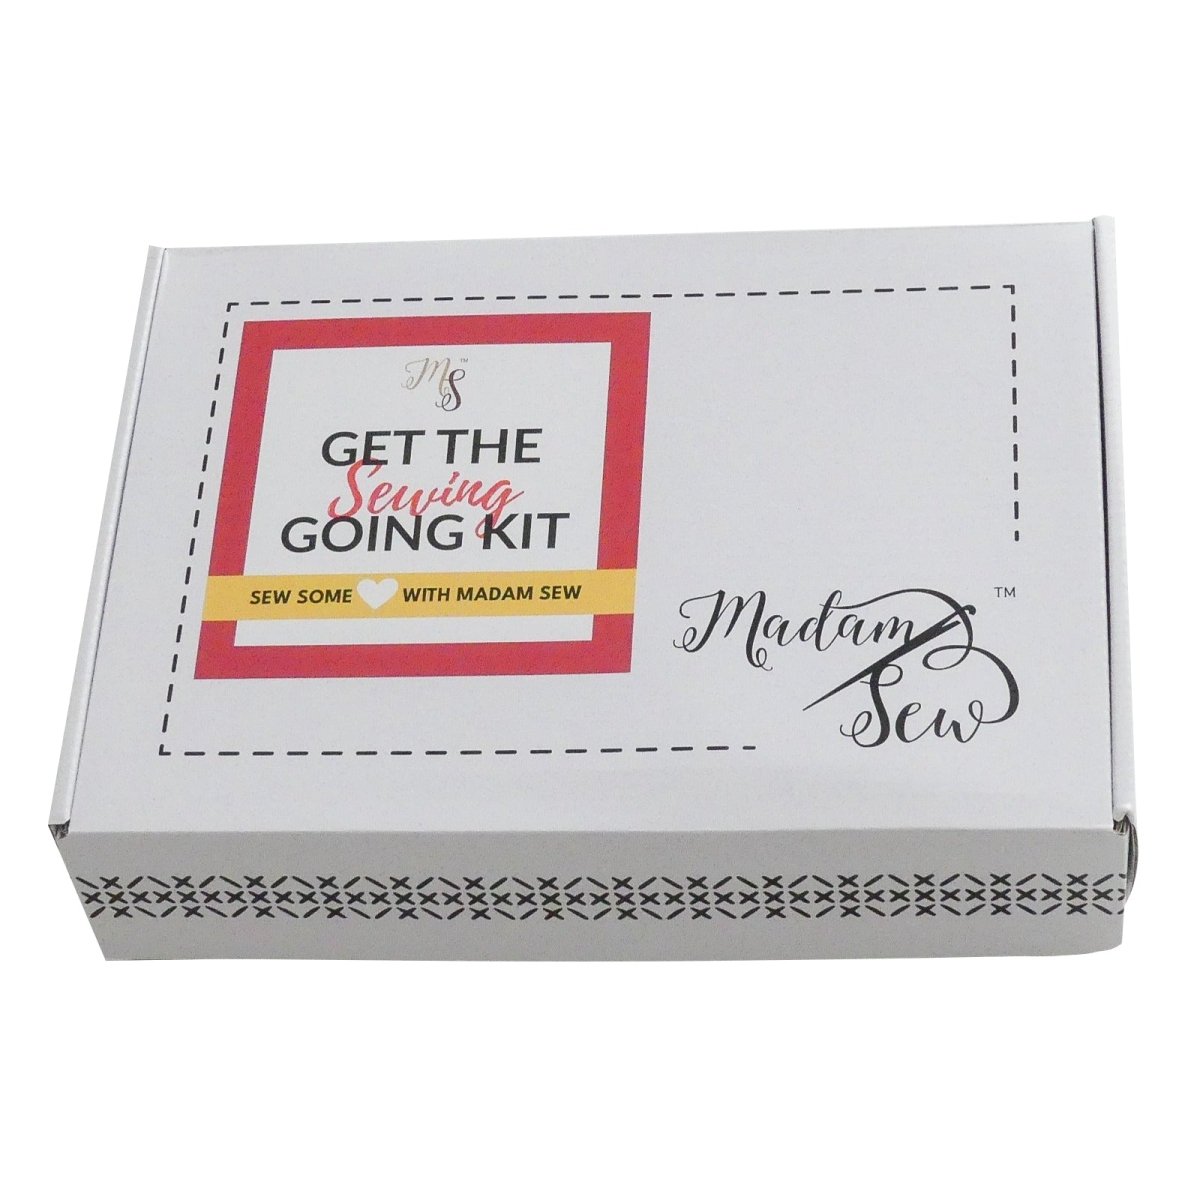 A white box of the Madam Sew starter kit for sewing